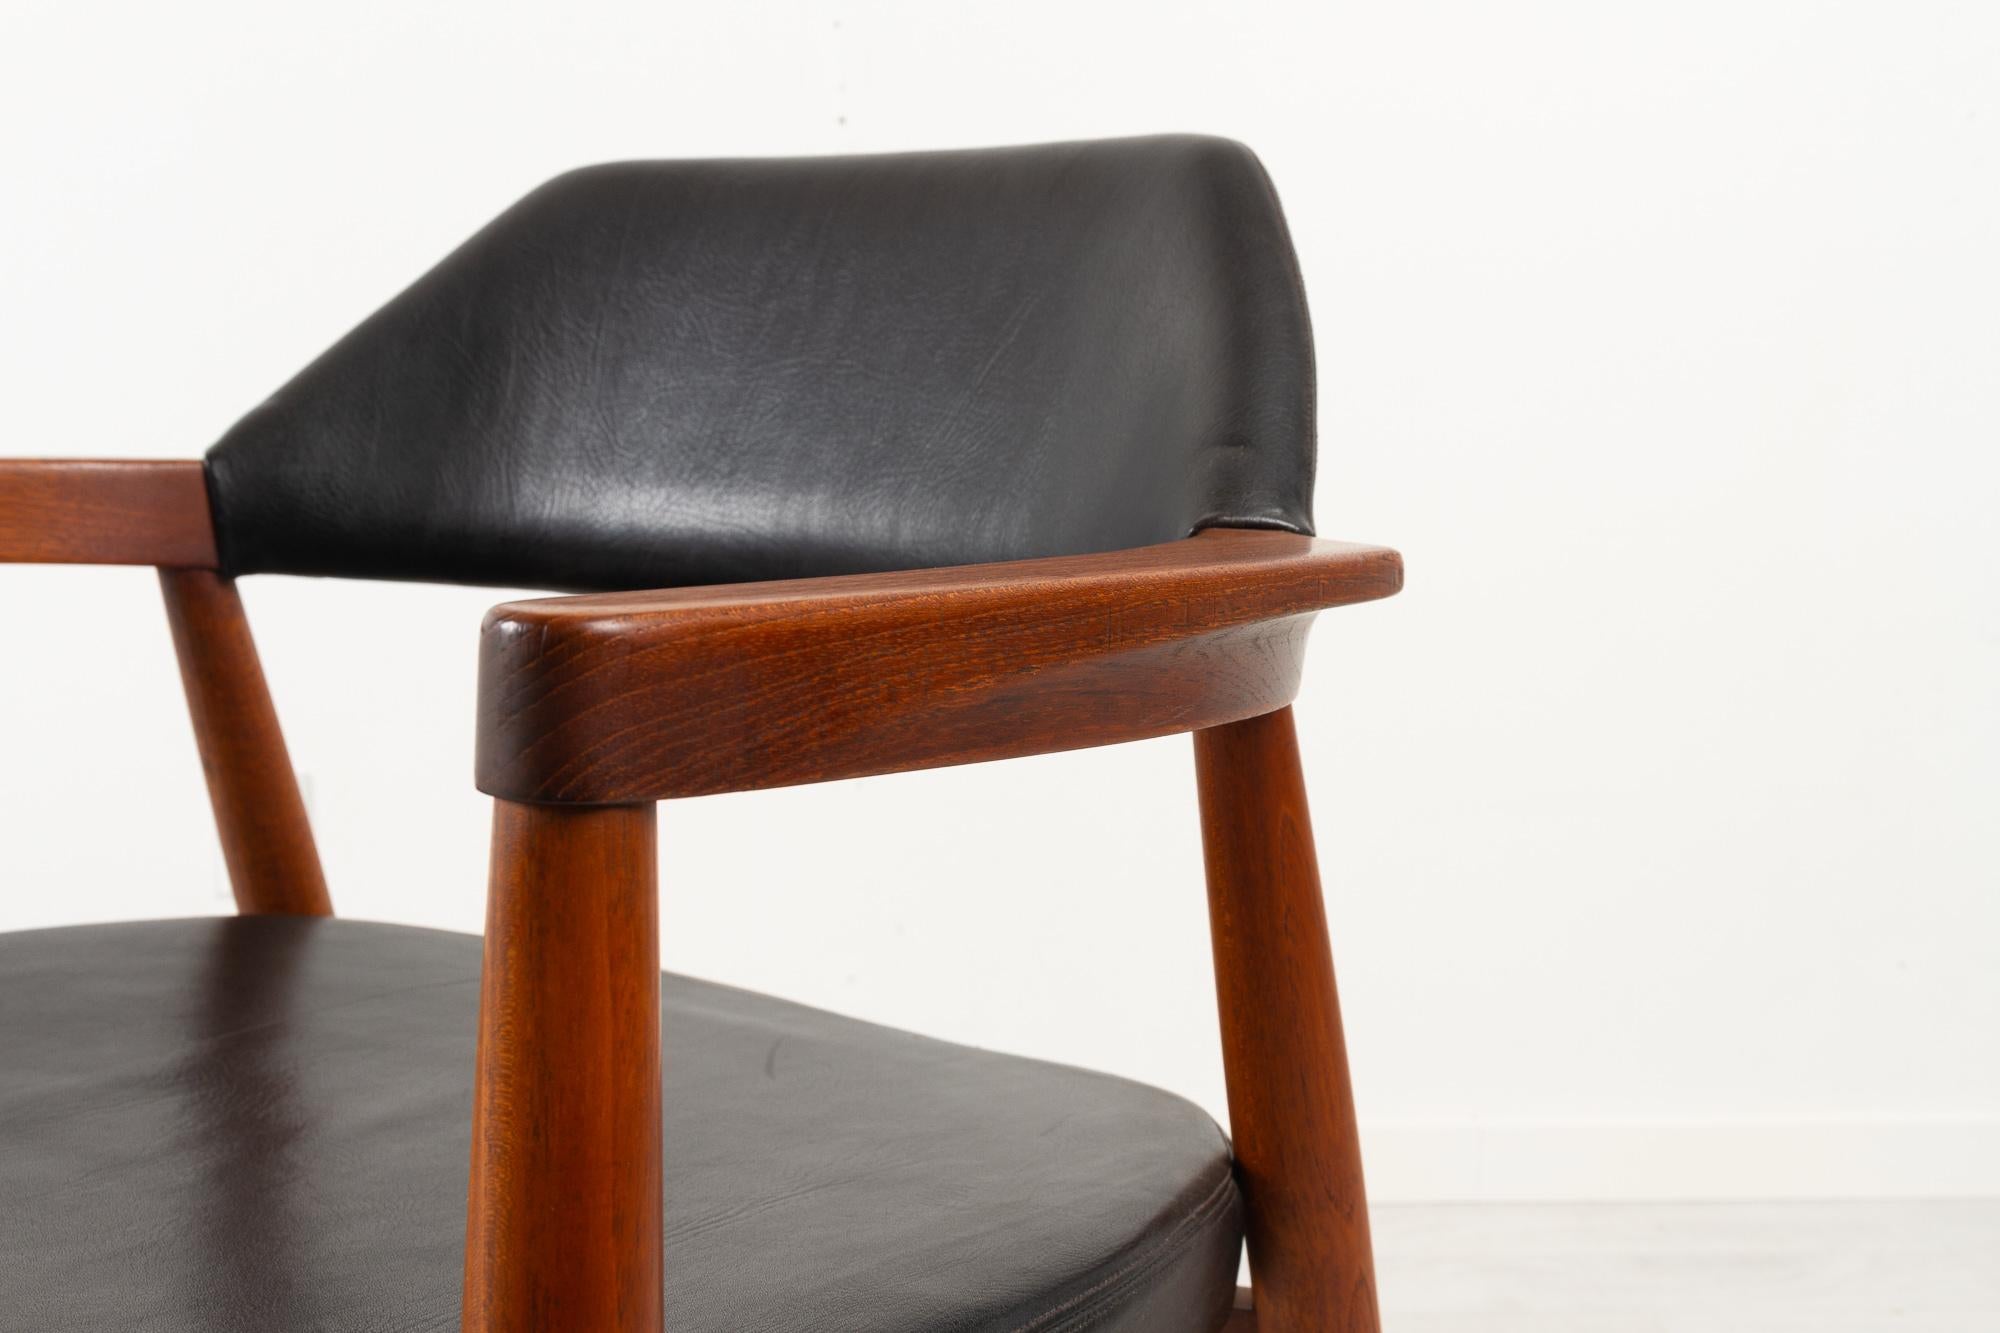 Vintage Danish Teak Armchair by Tove & Edvard Kindt-Larsen 1950s In Good Condition For Sale In Asaa, DK